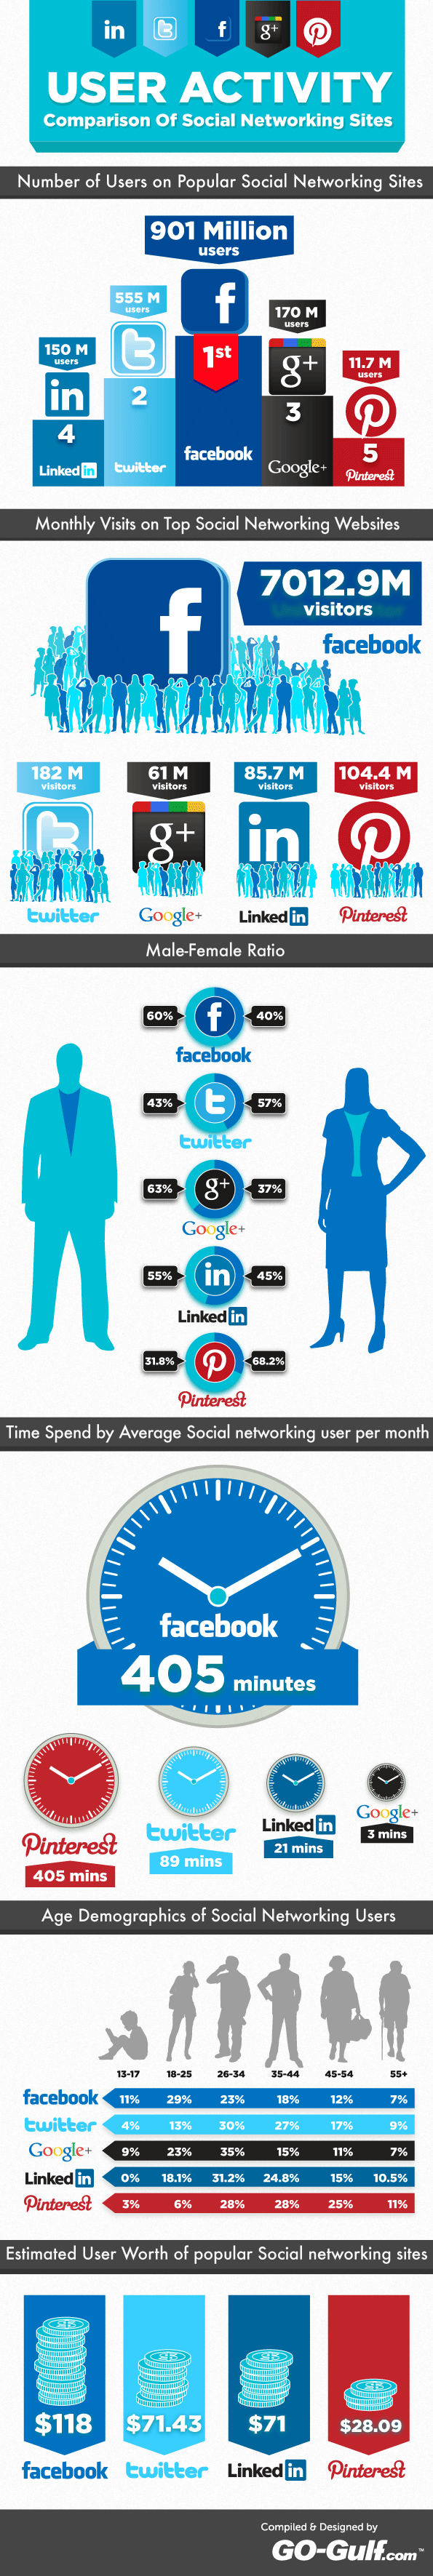 Comparing User Activity Across Social Services [Infographic]